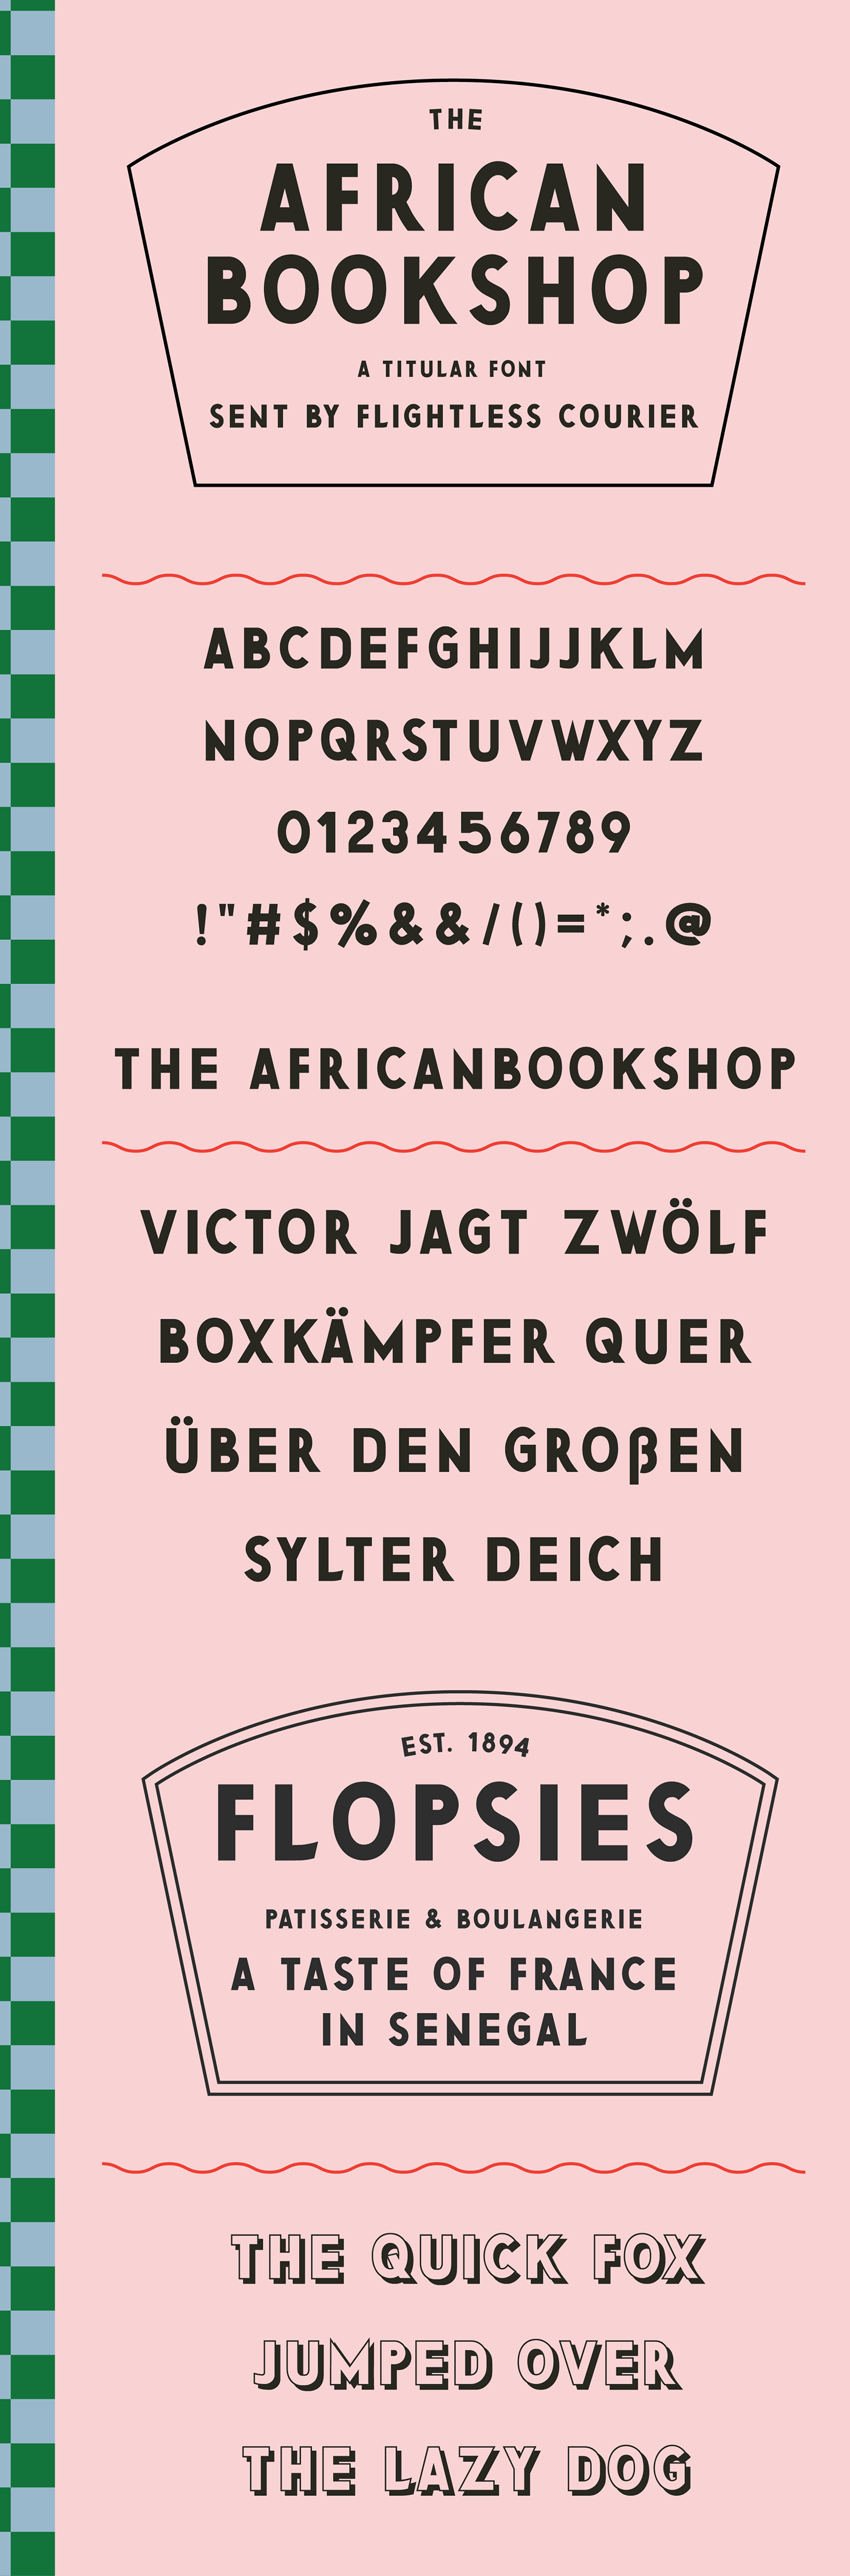 africa african creative market font font design tin tin Travel wes anderson